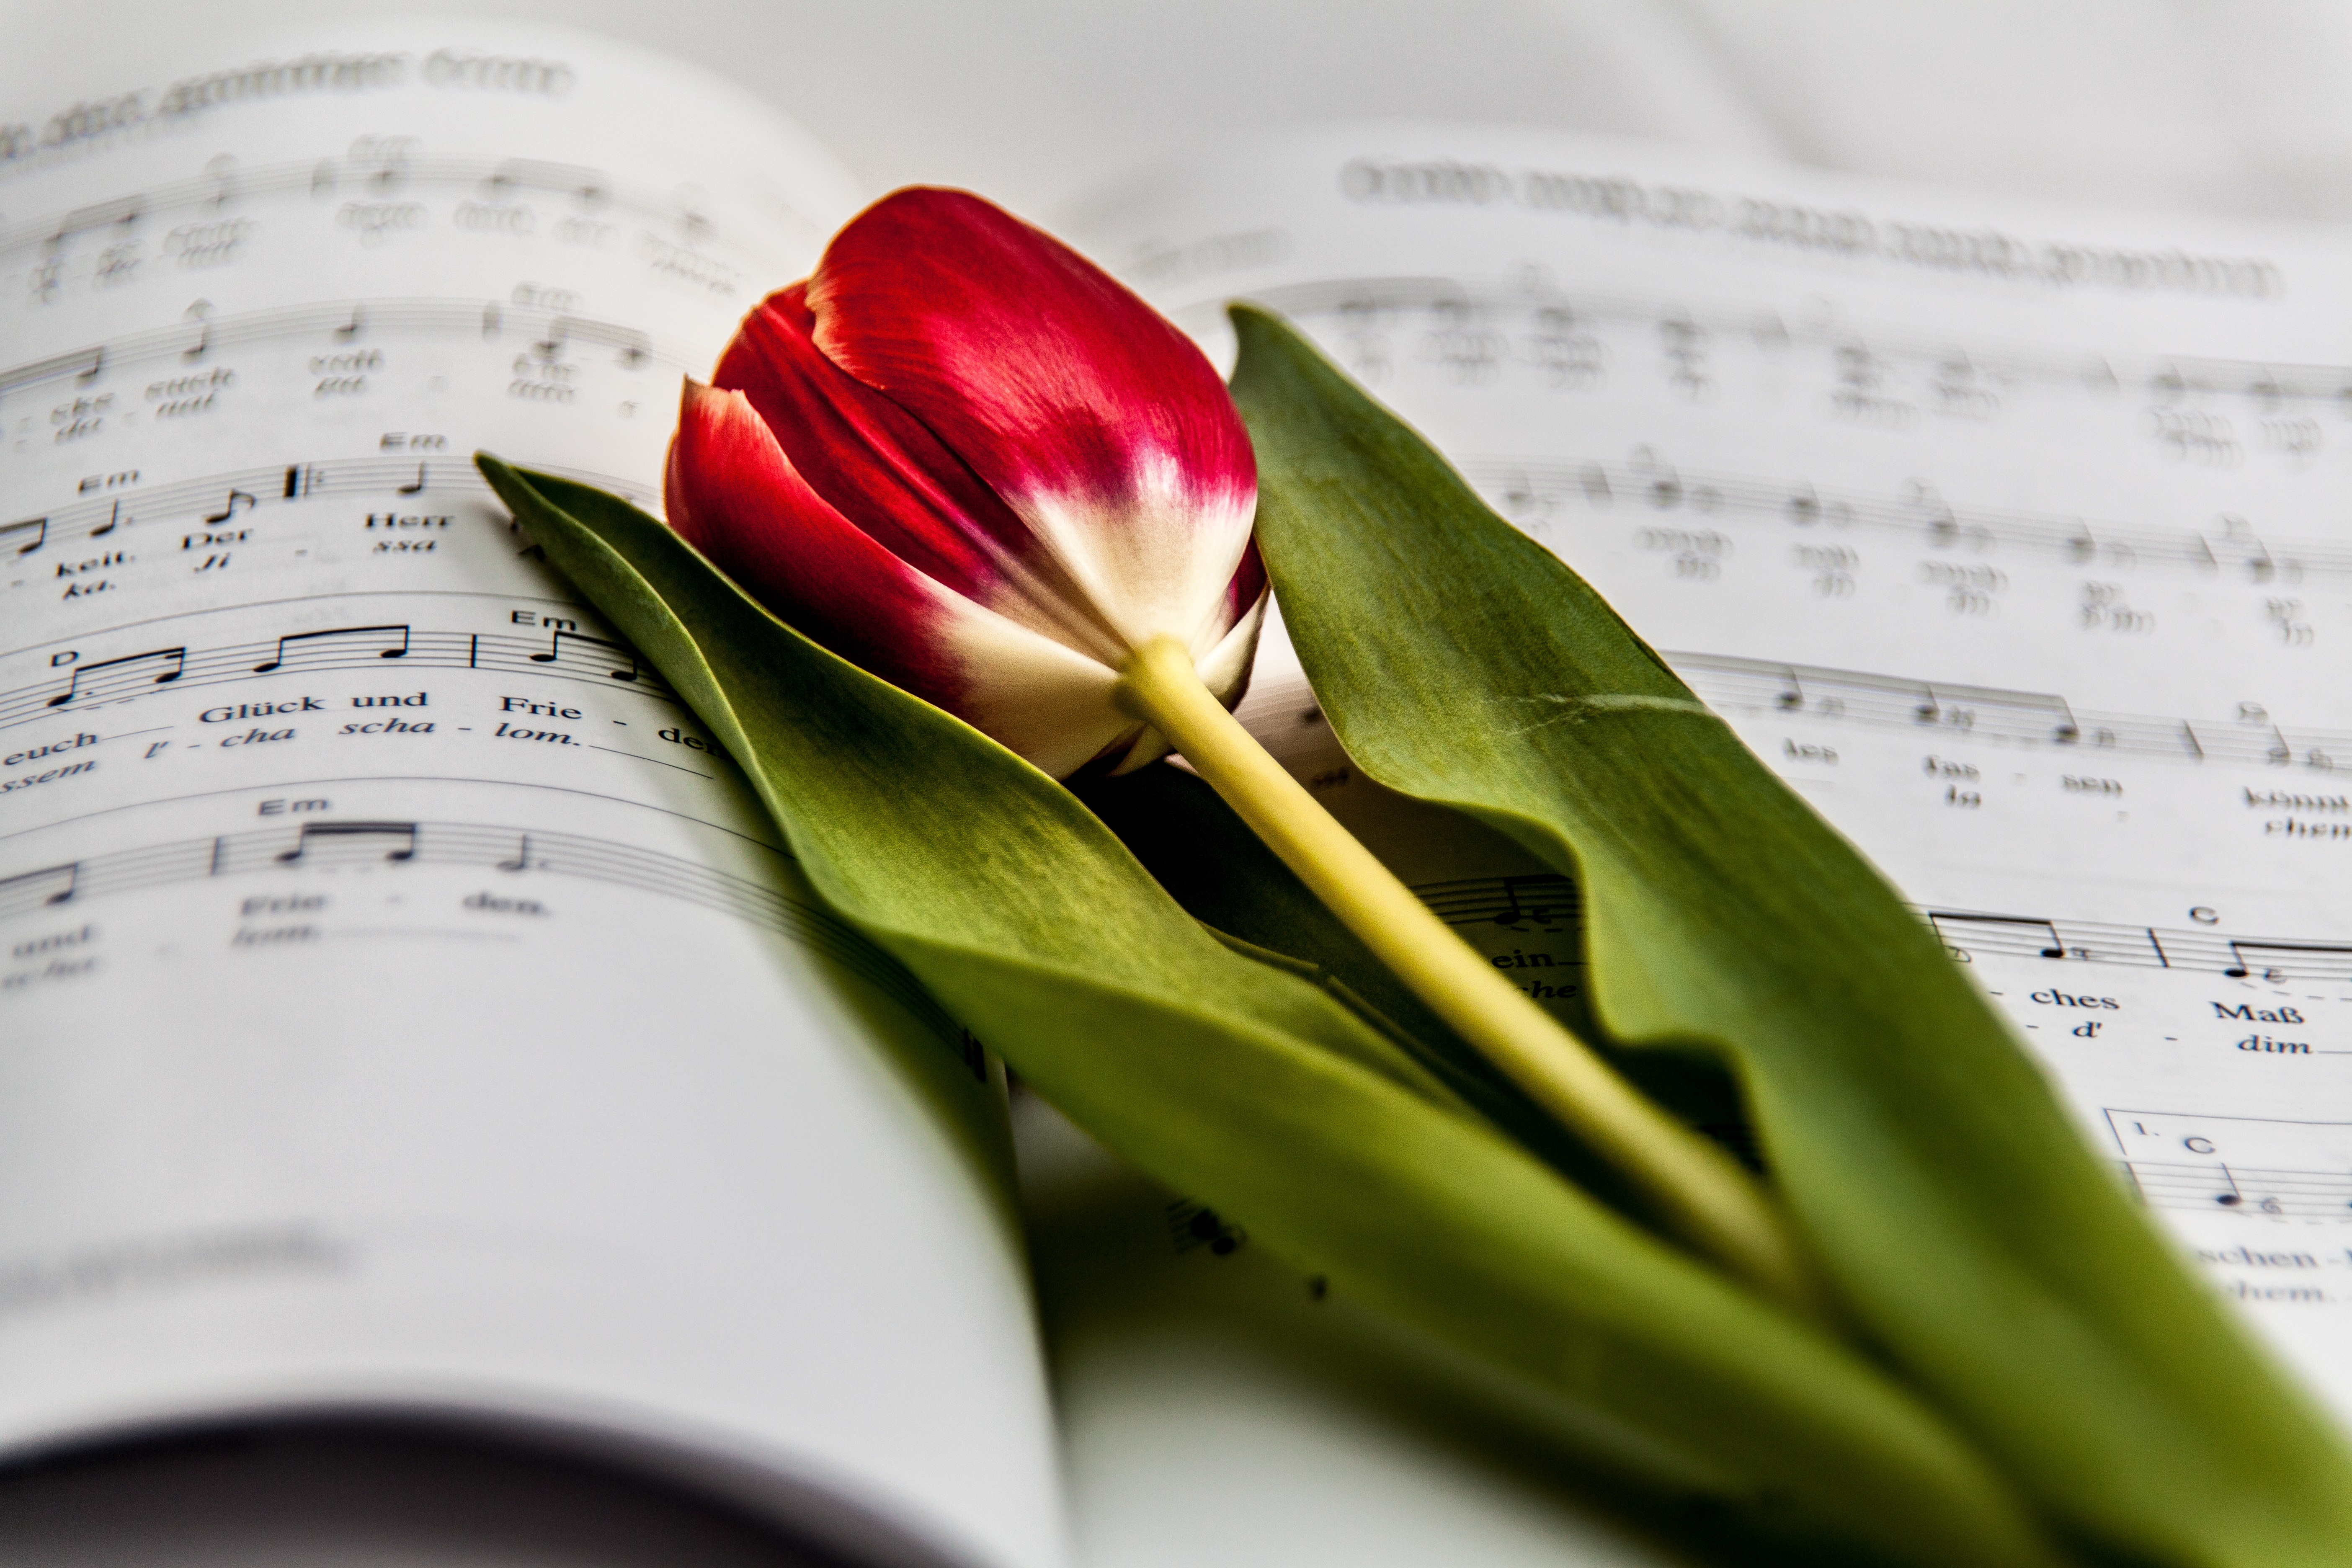 A red tulip rests on a book of musical notes